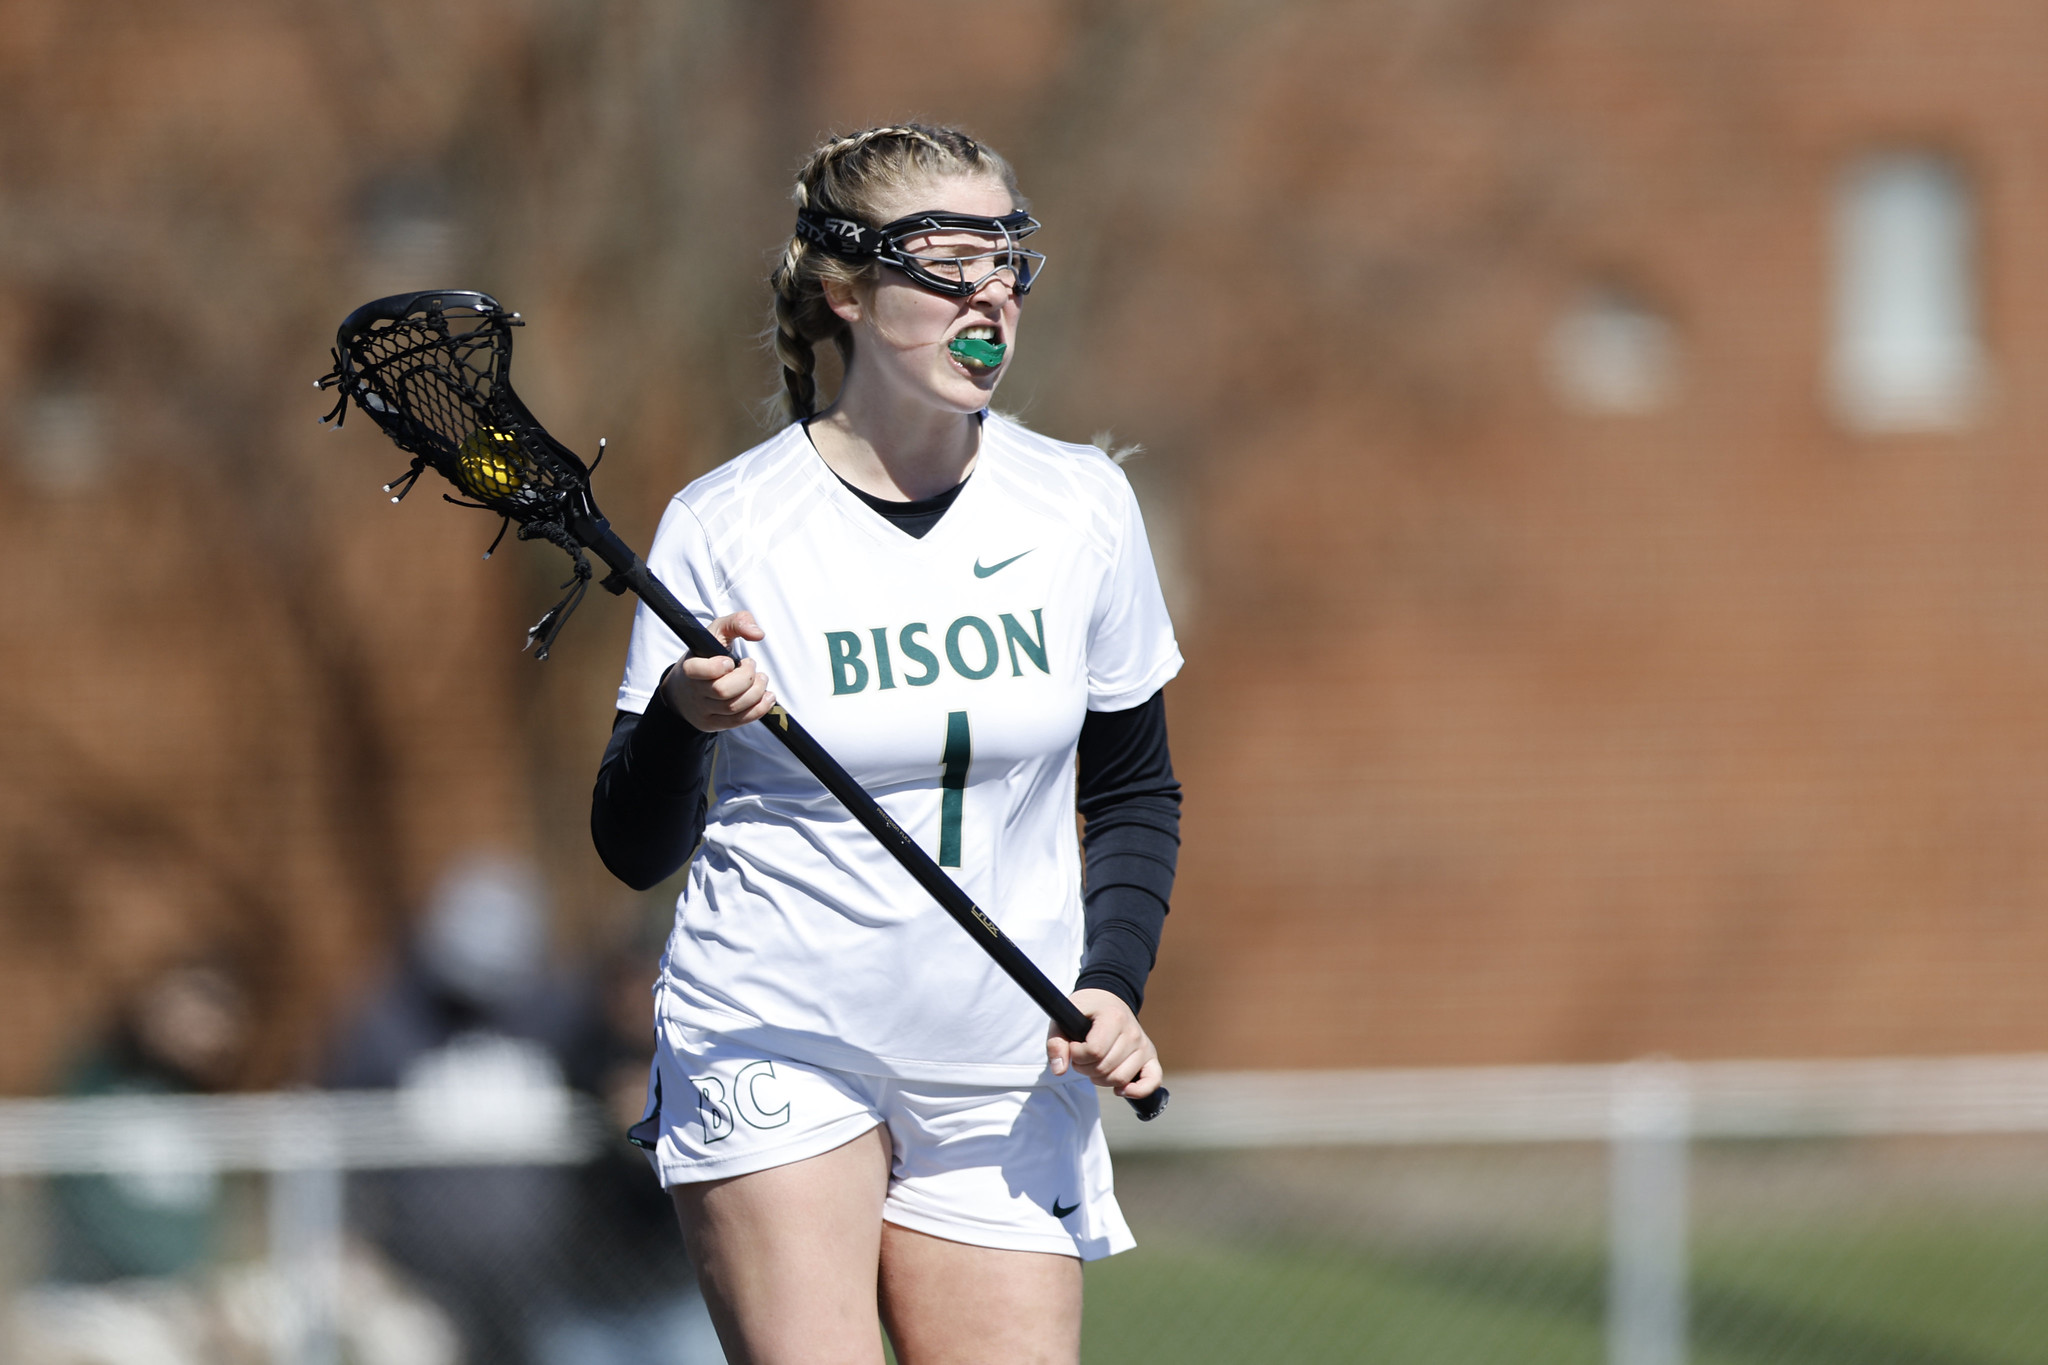 Women's Lacrosse: Carpenter Breaks Single Game Scoring Record to Help Edge Out Win over Bearcats